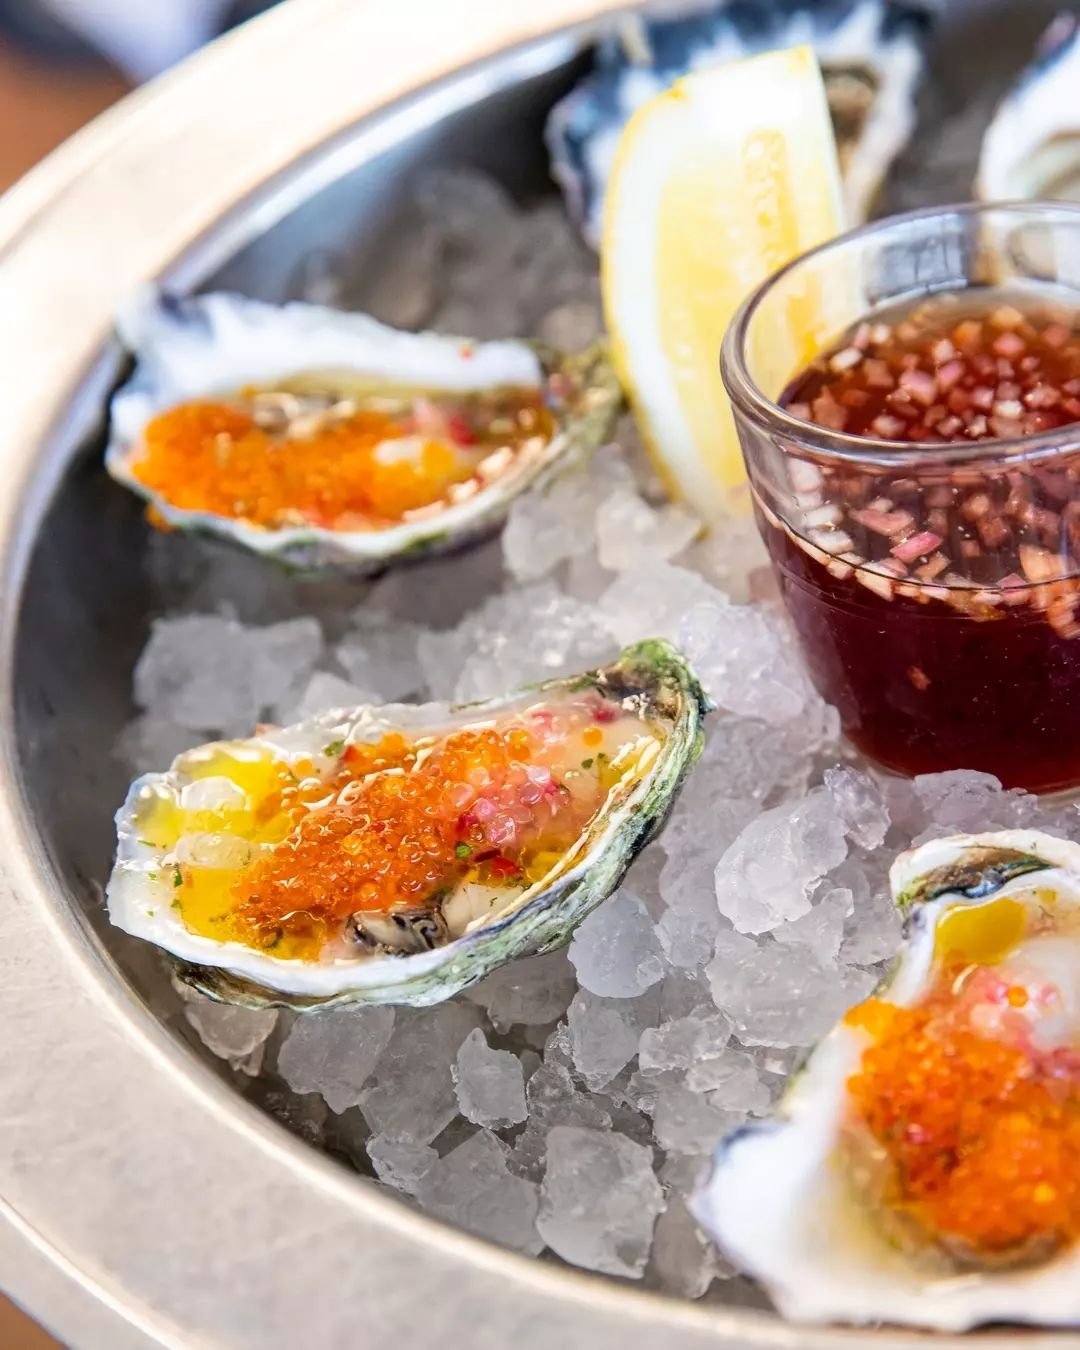 Starting your meal with our freshly shucked Sydney Rock oysters is always a good idea! These beauties feature native Australian finger lime ceviche.